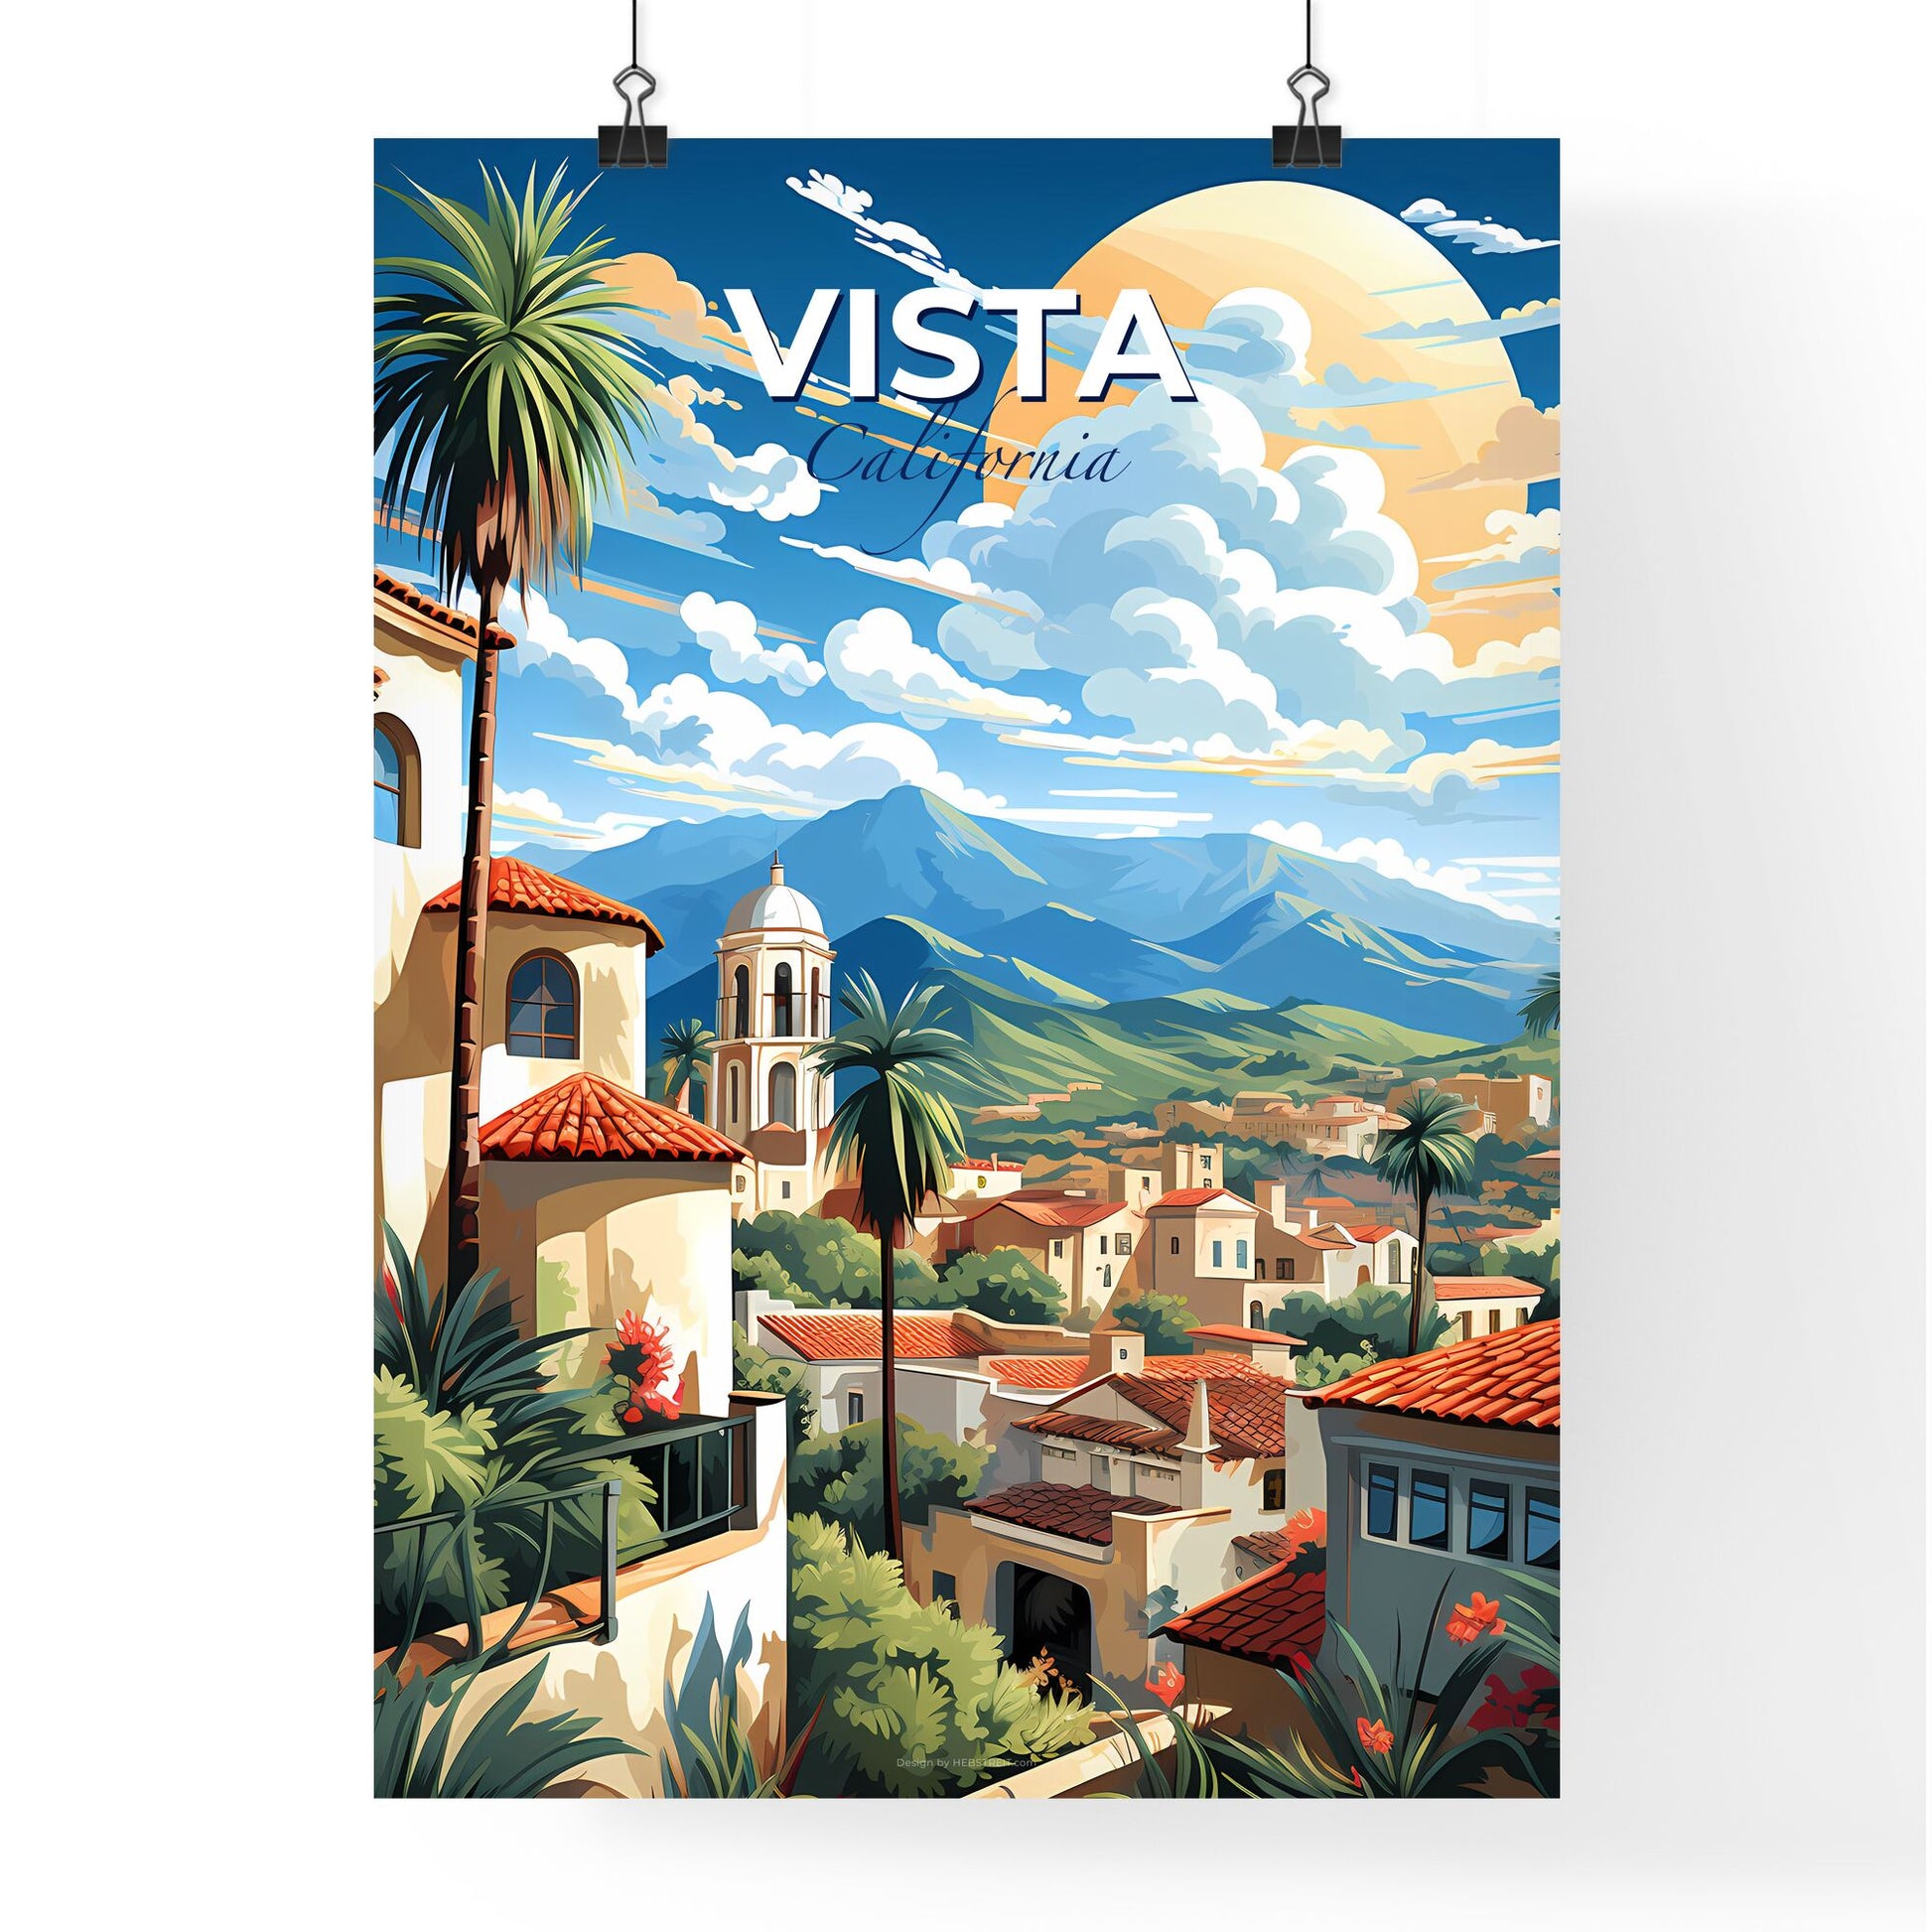 Vista, California, A Poster of a painting of a town with mountains and trees Default Title